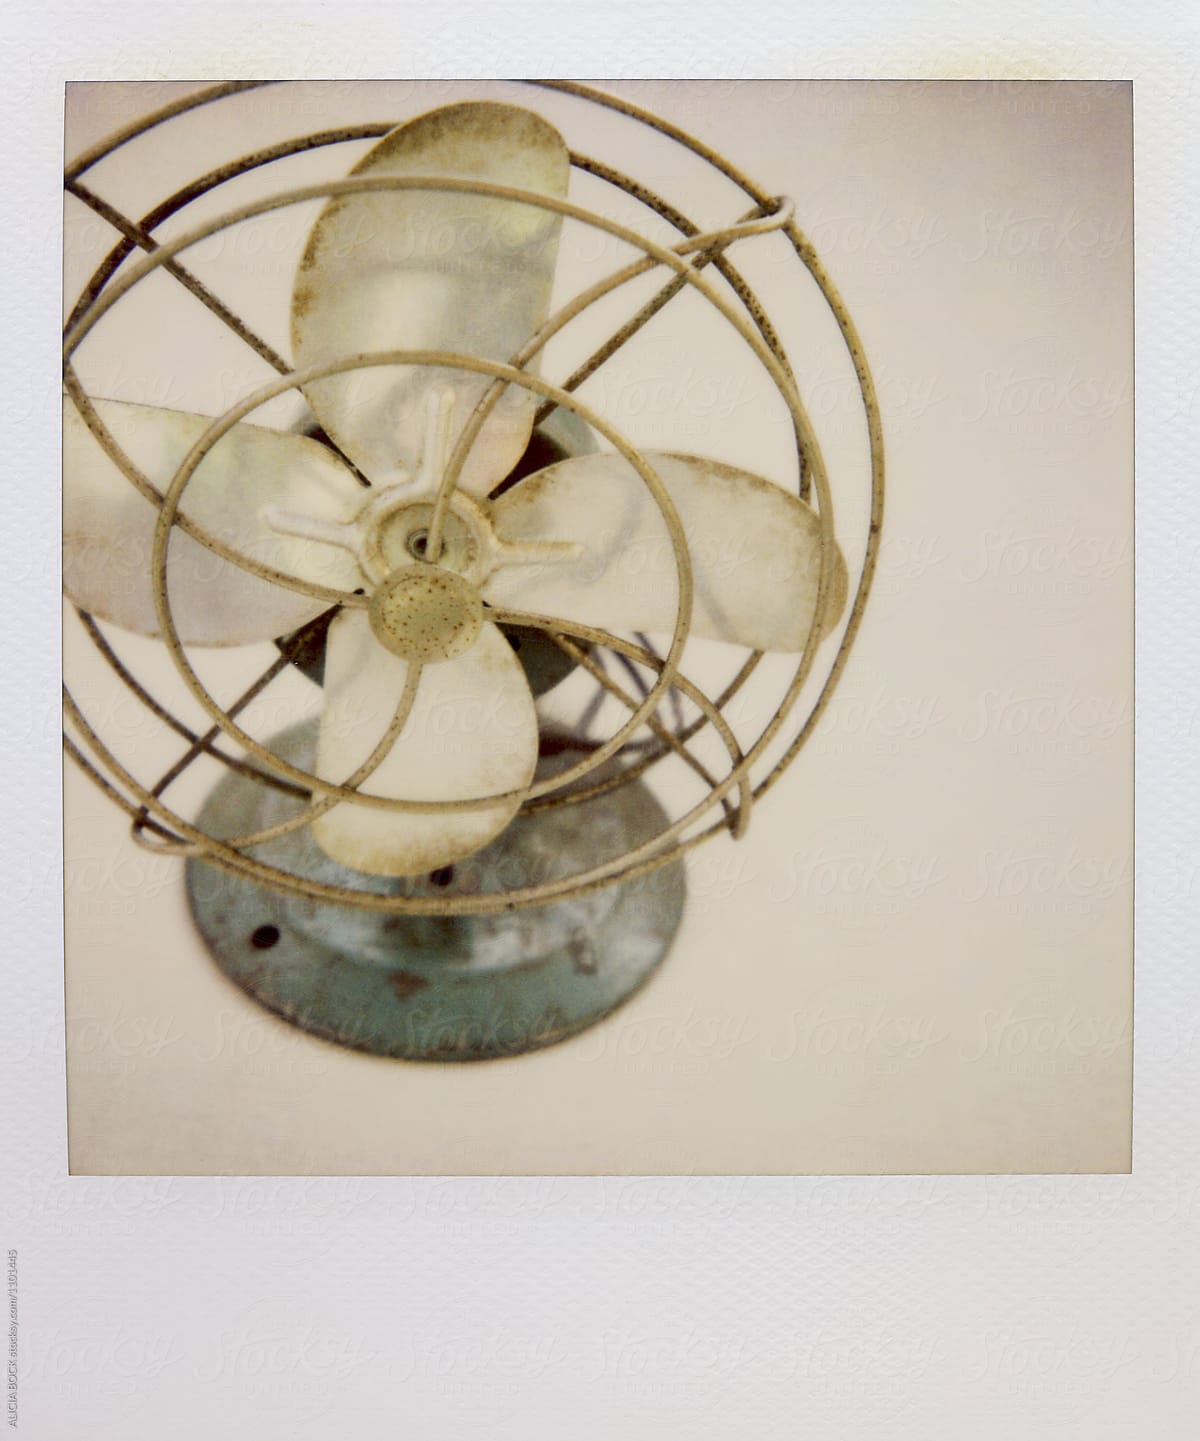 A Vintage Fan Photographed With Expired Polaroid Film